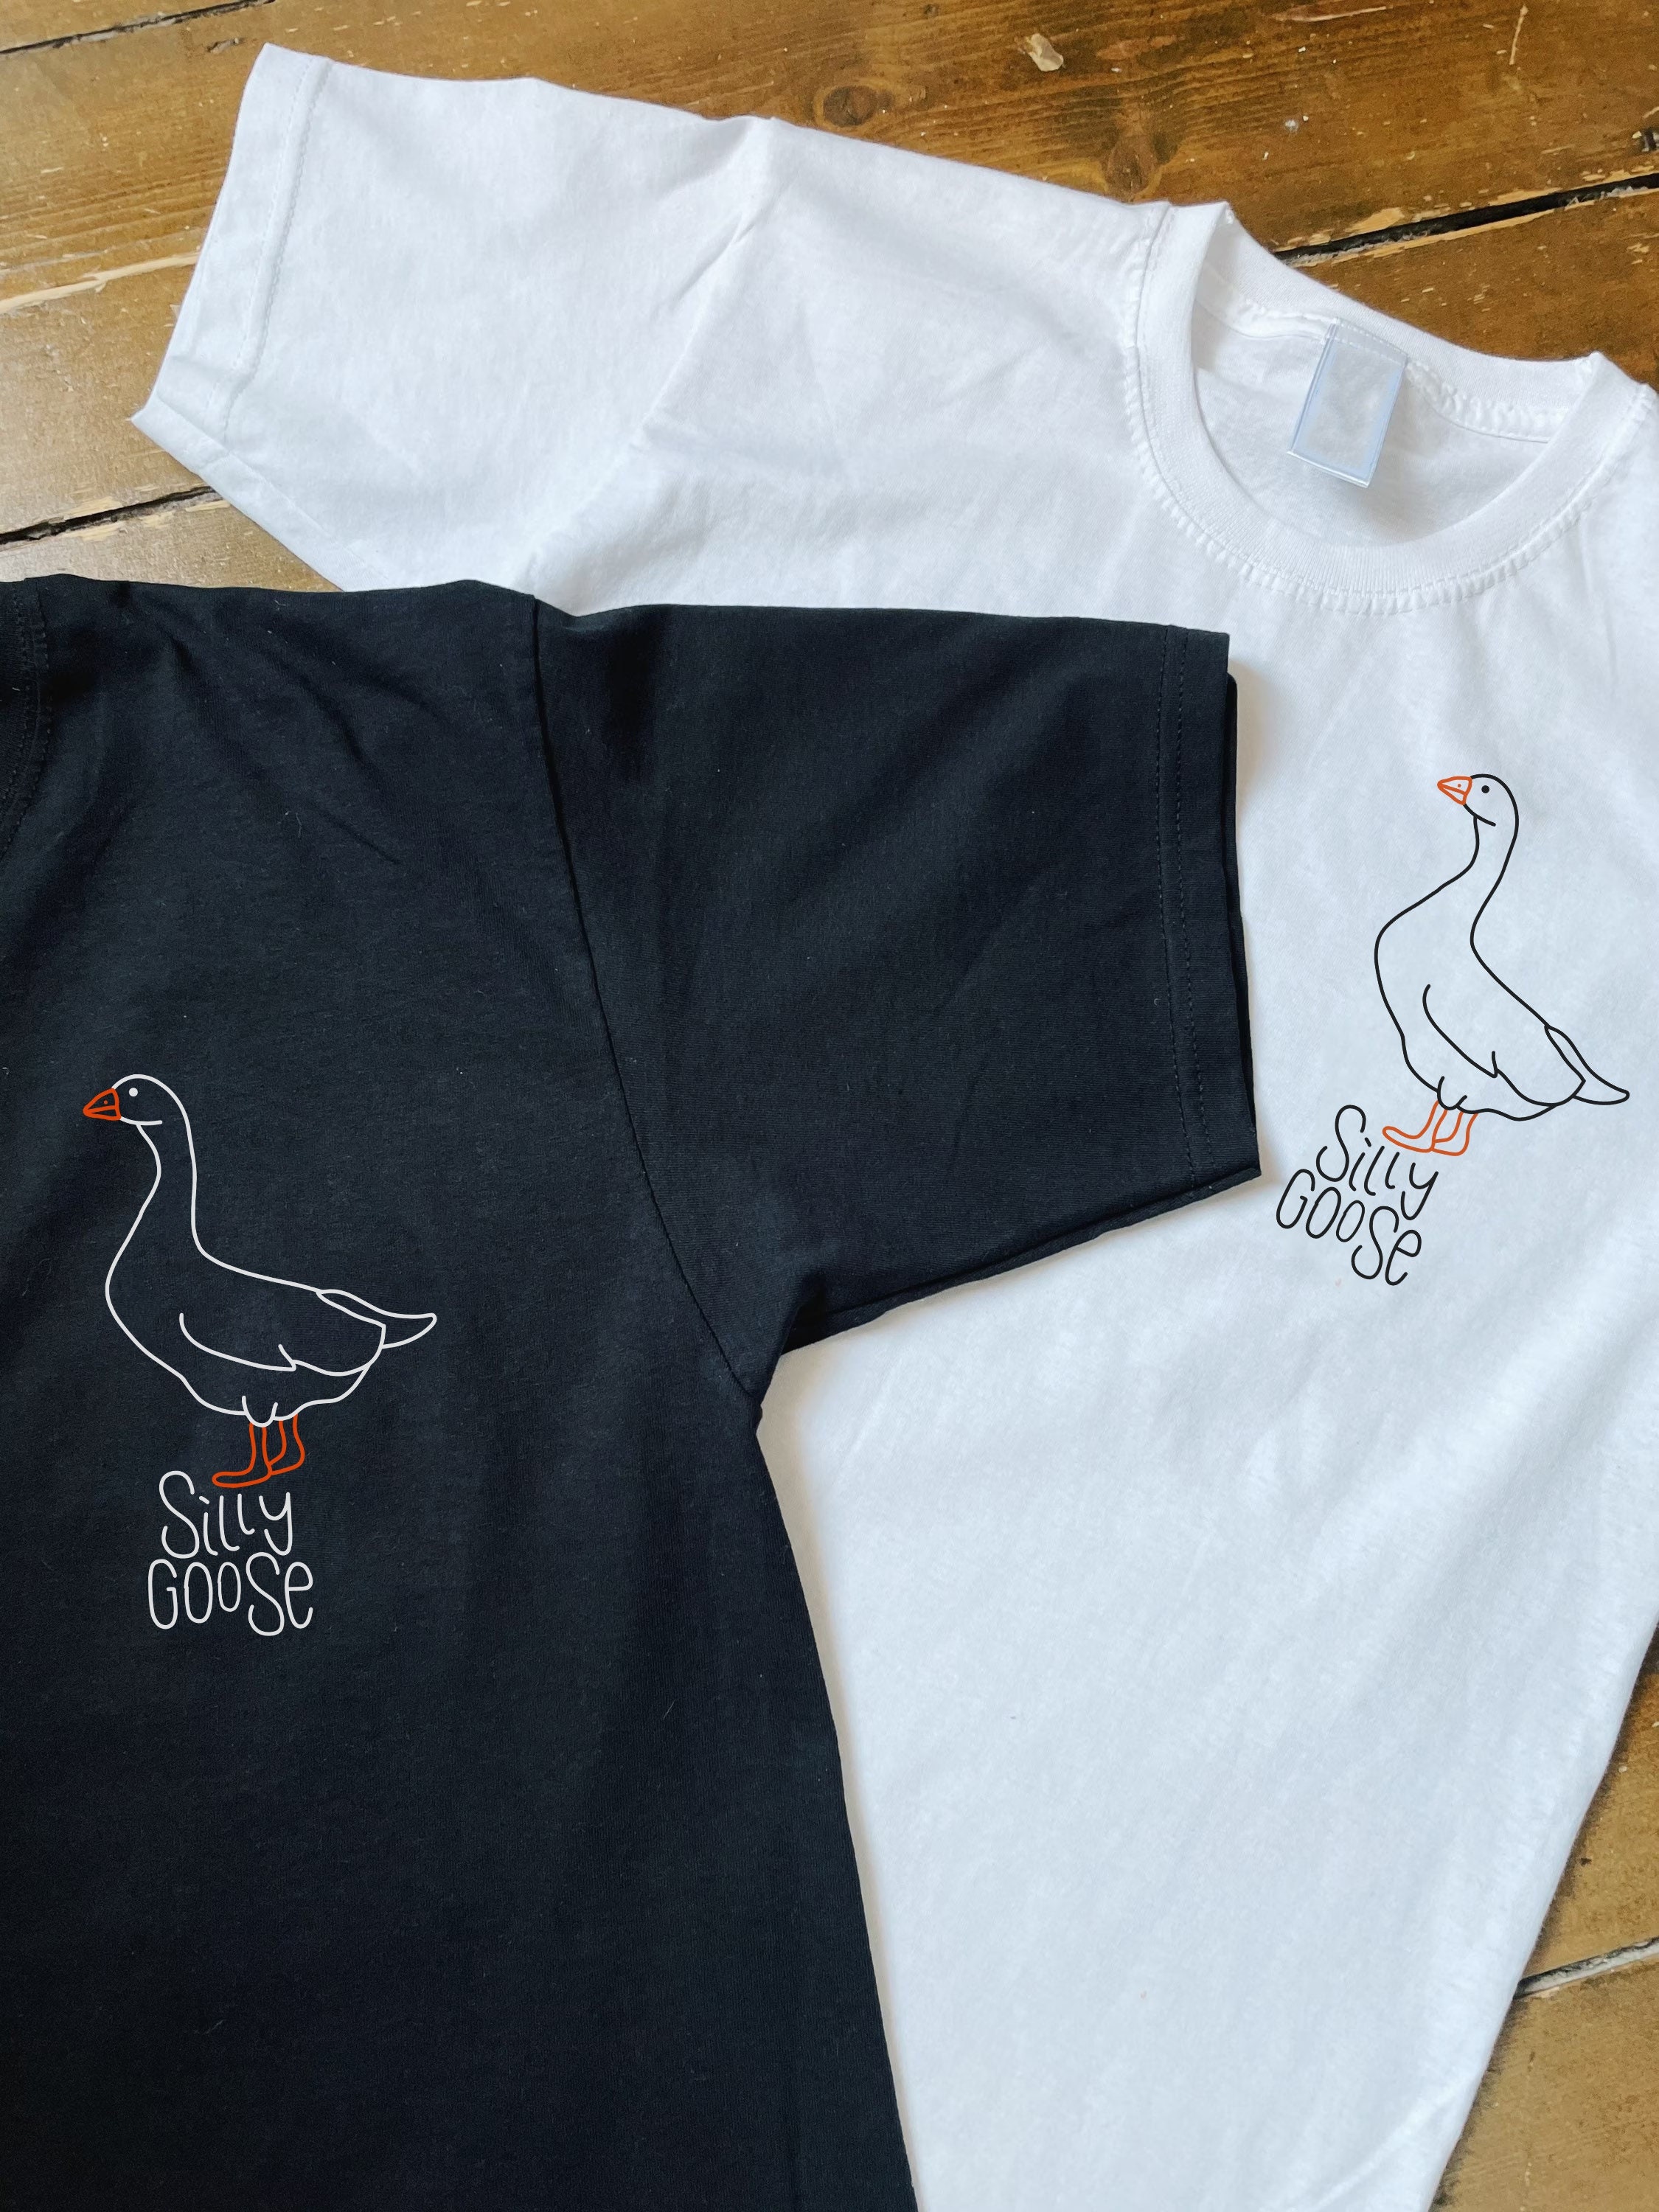 Discover Silly Goose Shirt, Unisex Silly Goose Shirt